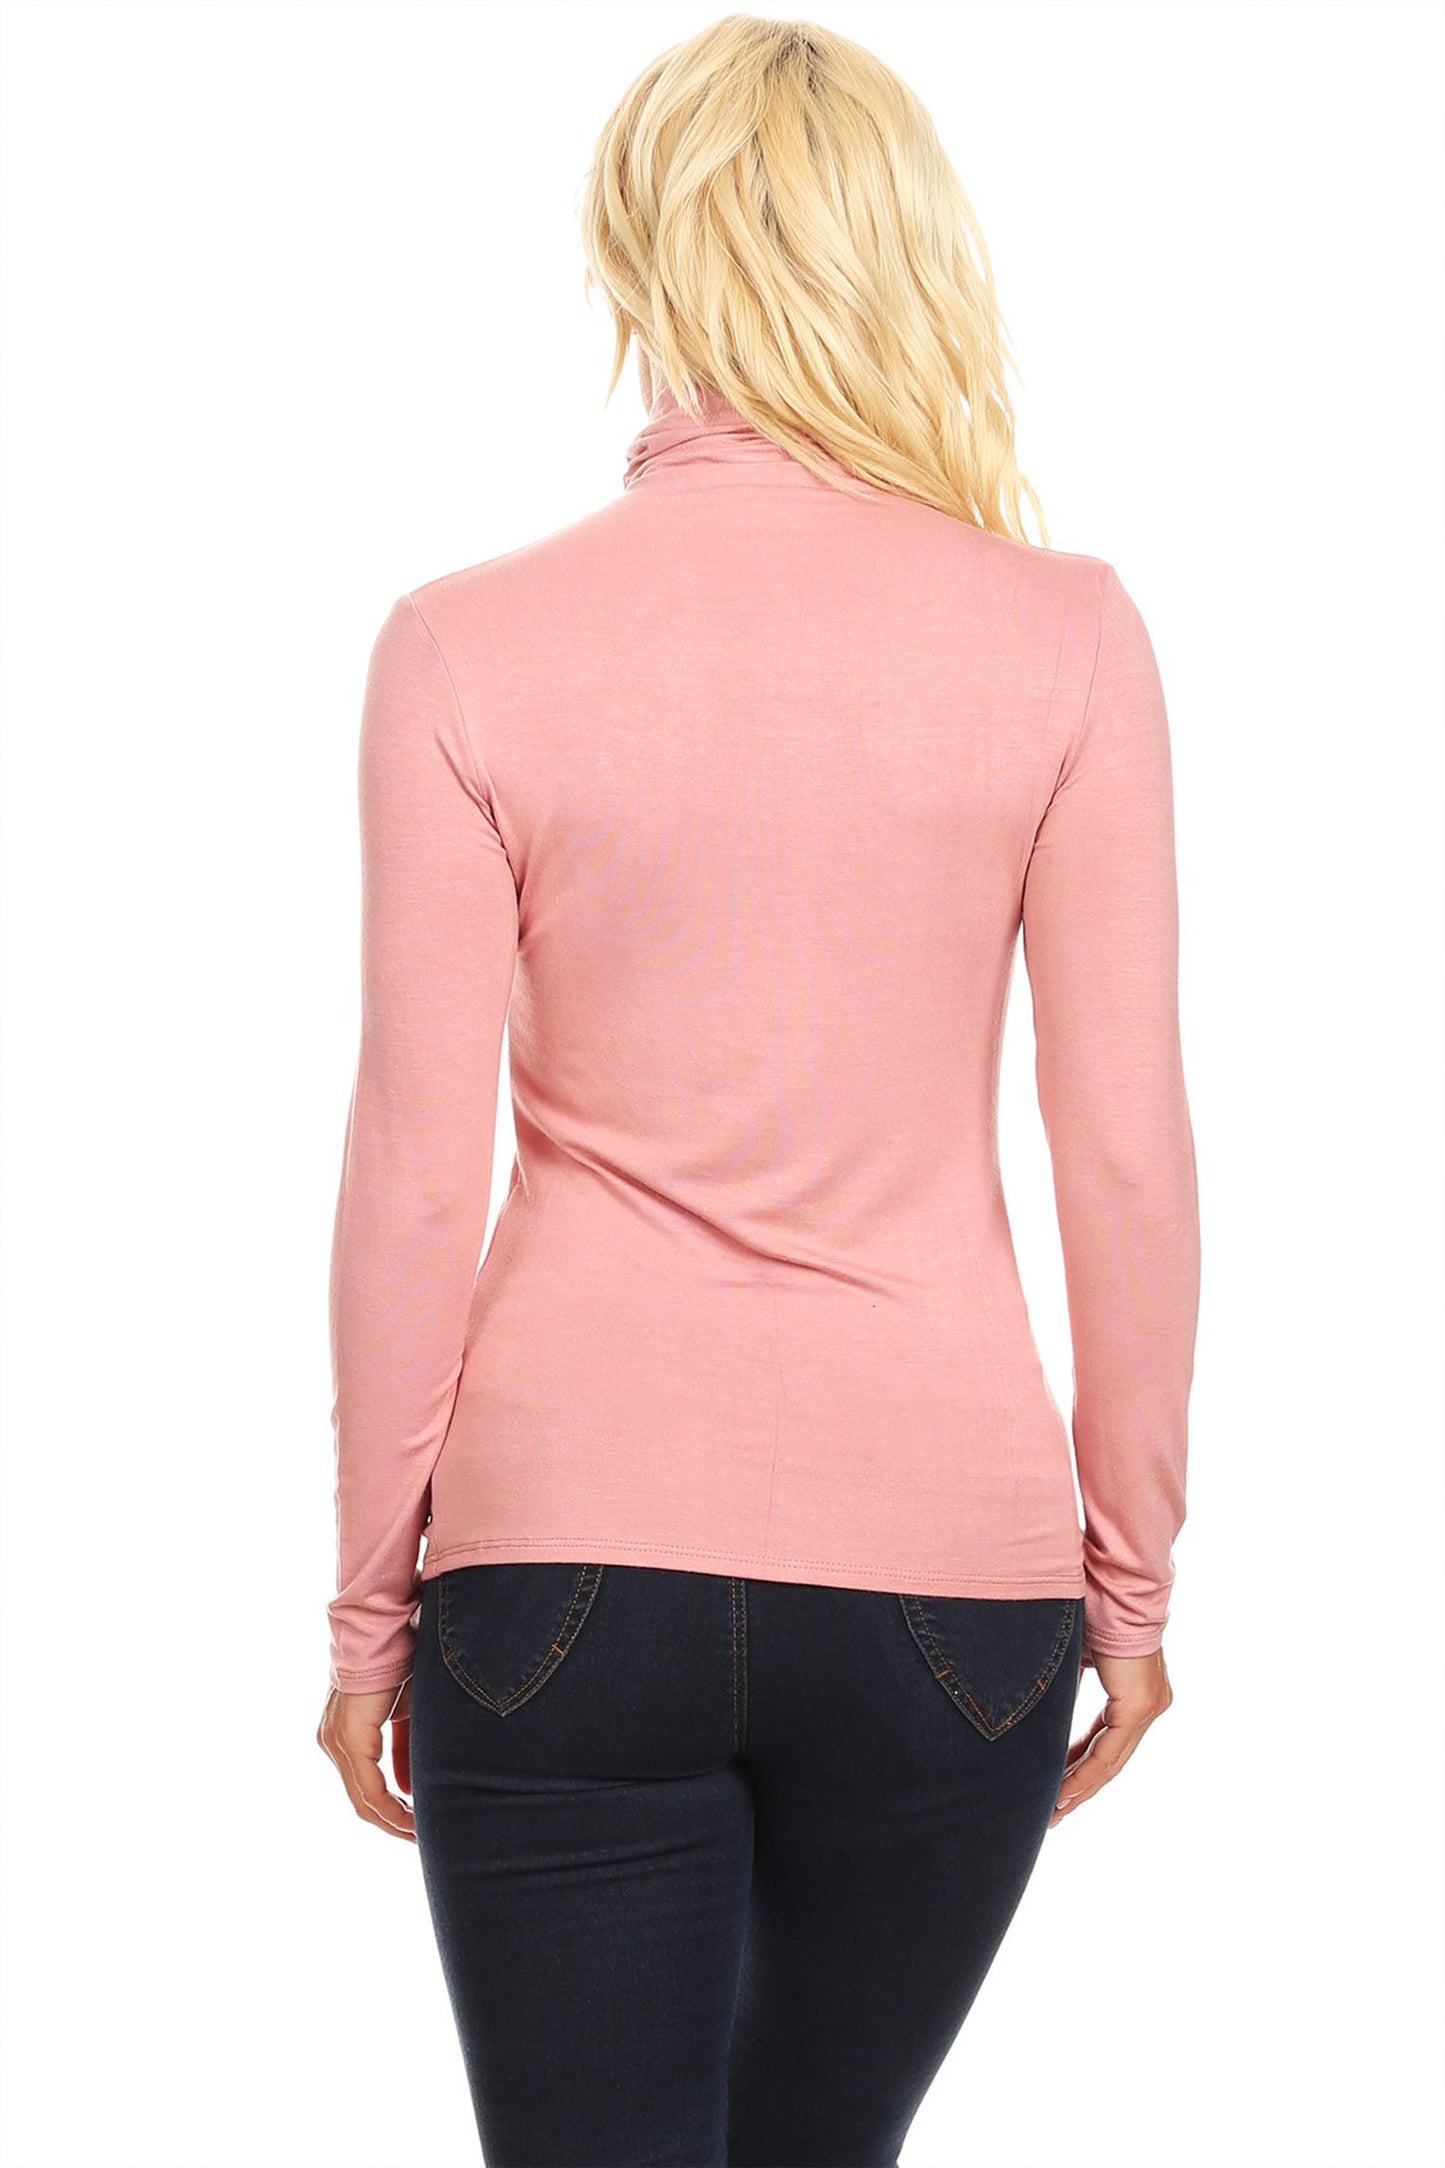 Women's Solid Basic Casual Long Sleeve Turtleneck Lightweight Pullover Top Sweater